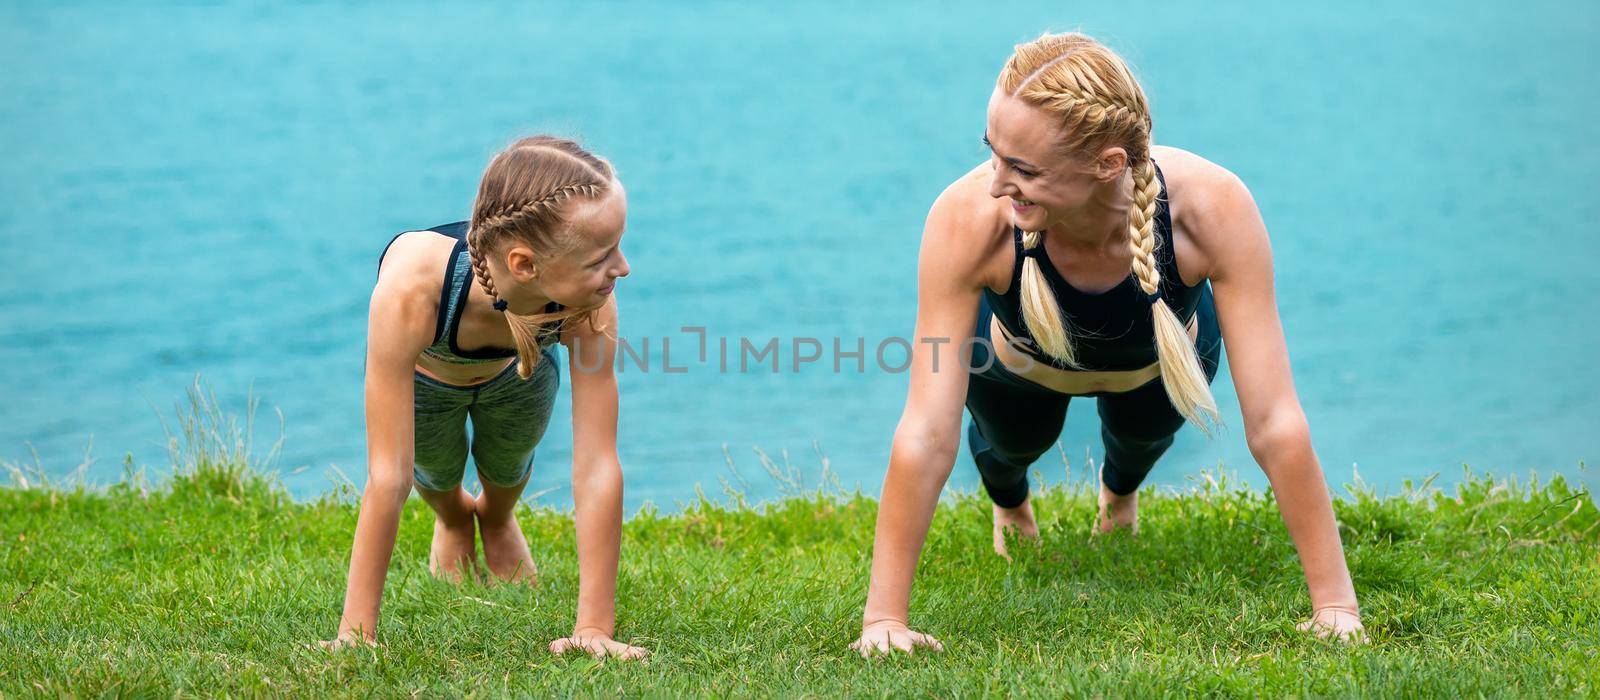 Woman and girl doing push-up exercise on the grass near lake outdoors